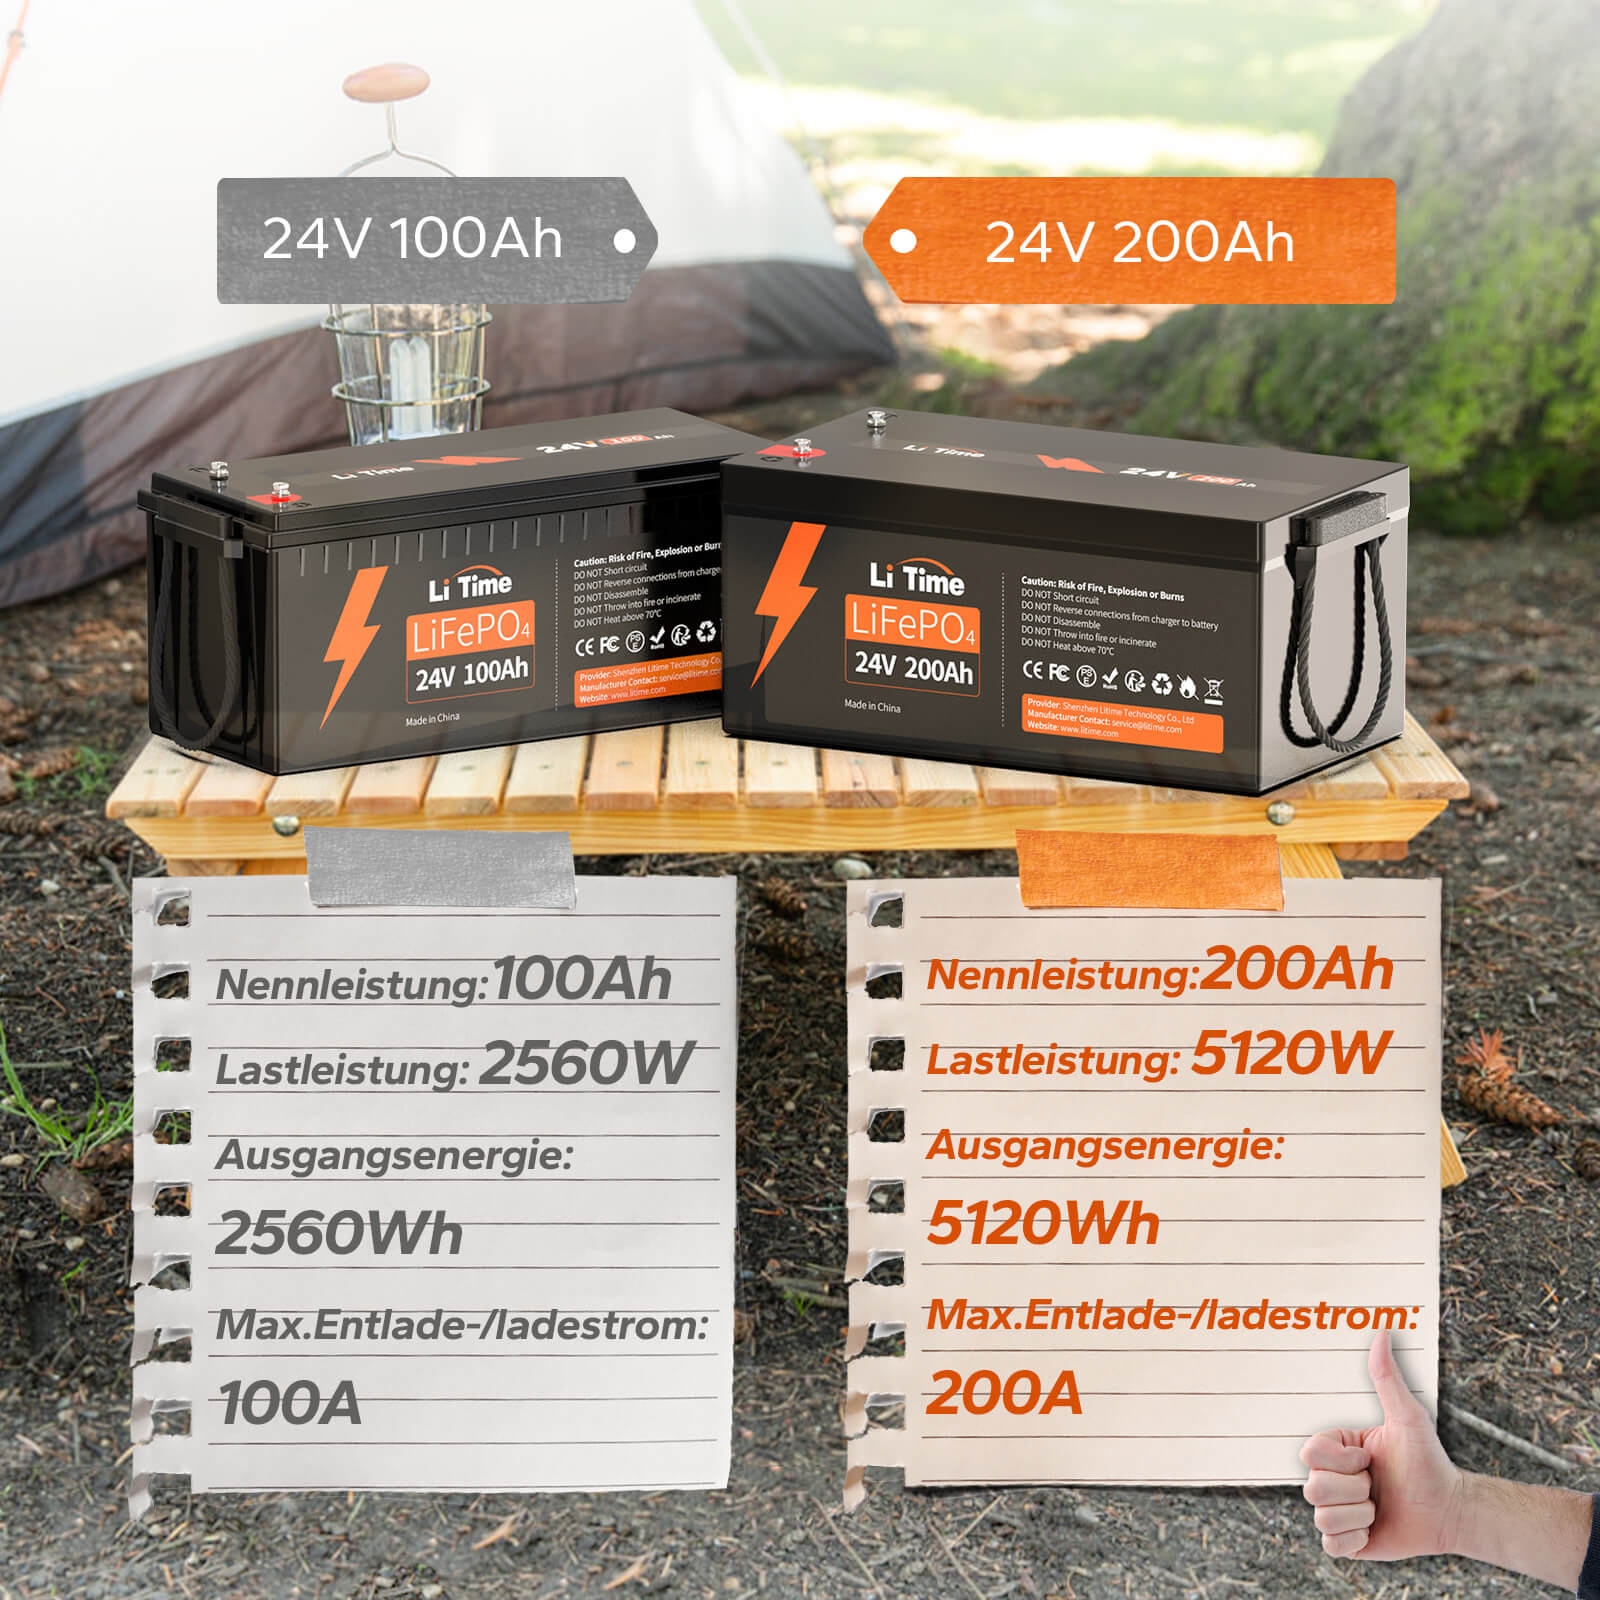 【0% VAT】LiTime 24V 200Ah Lithium LiFePO4 battery (ONLY for residential buildings and ONLY in DEU - Only for customers in Germany)